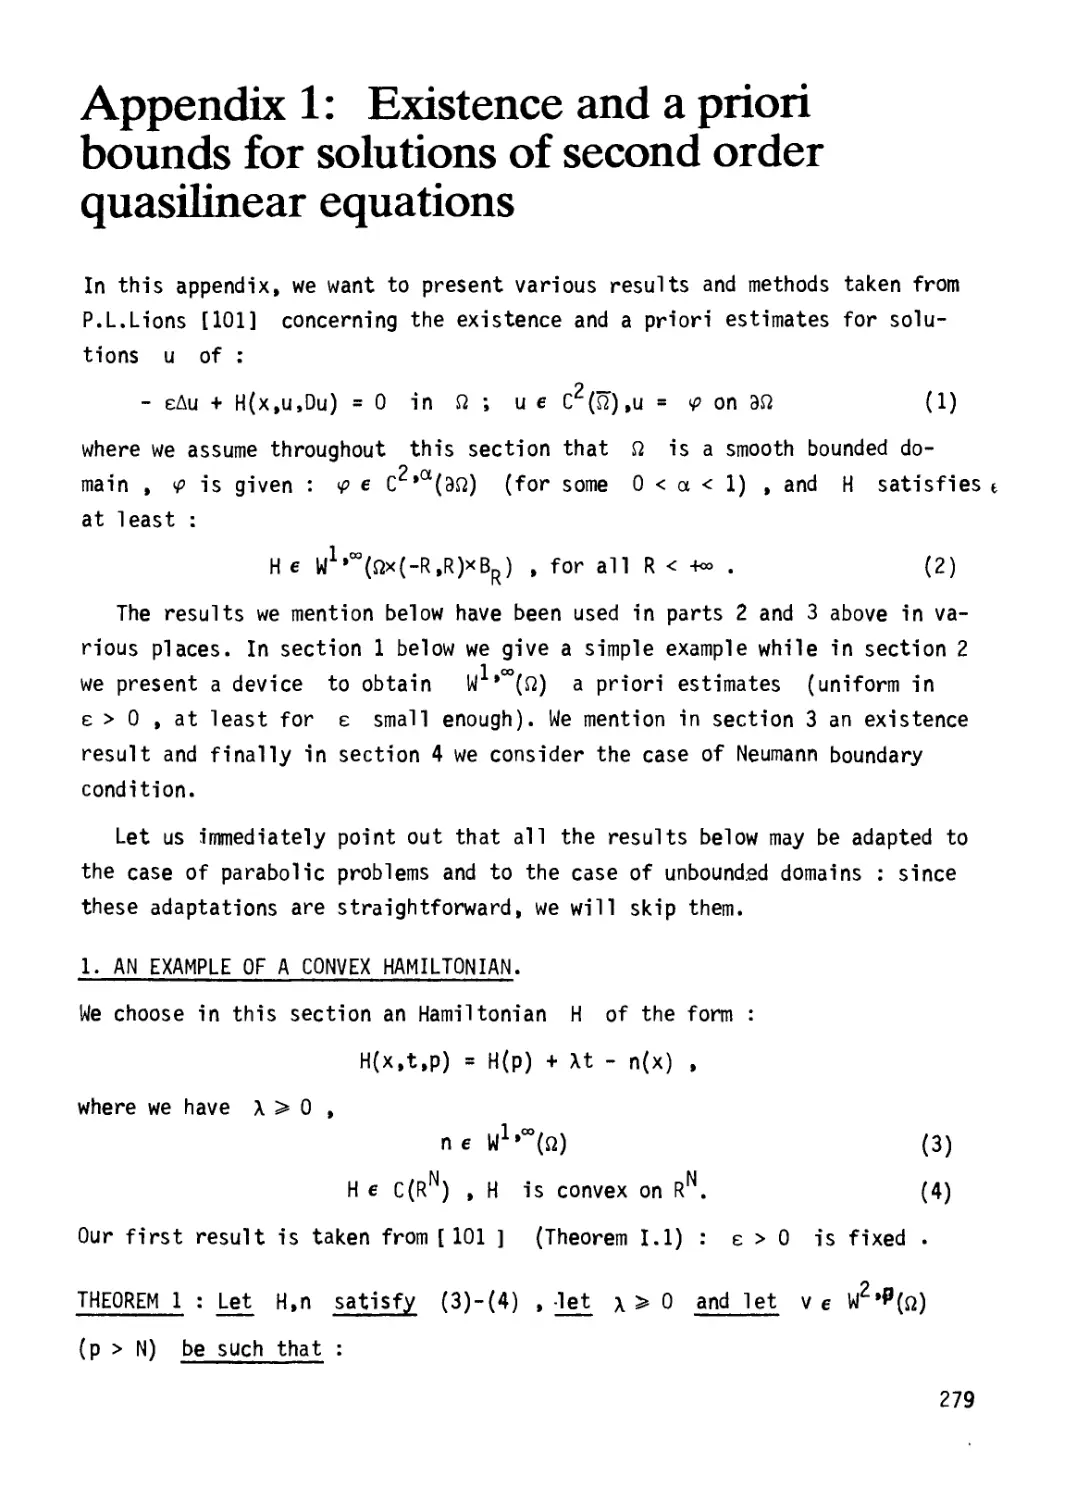 Appendix 1: Existence and a priori bounds for solutions of second order quasilinear equations